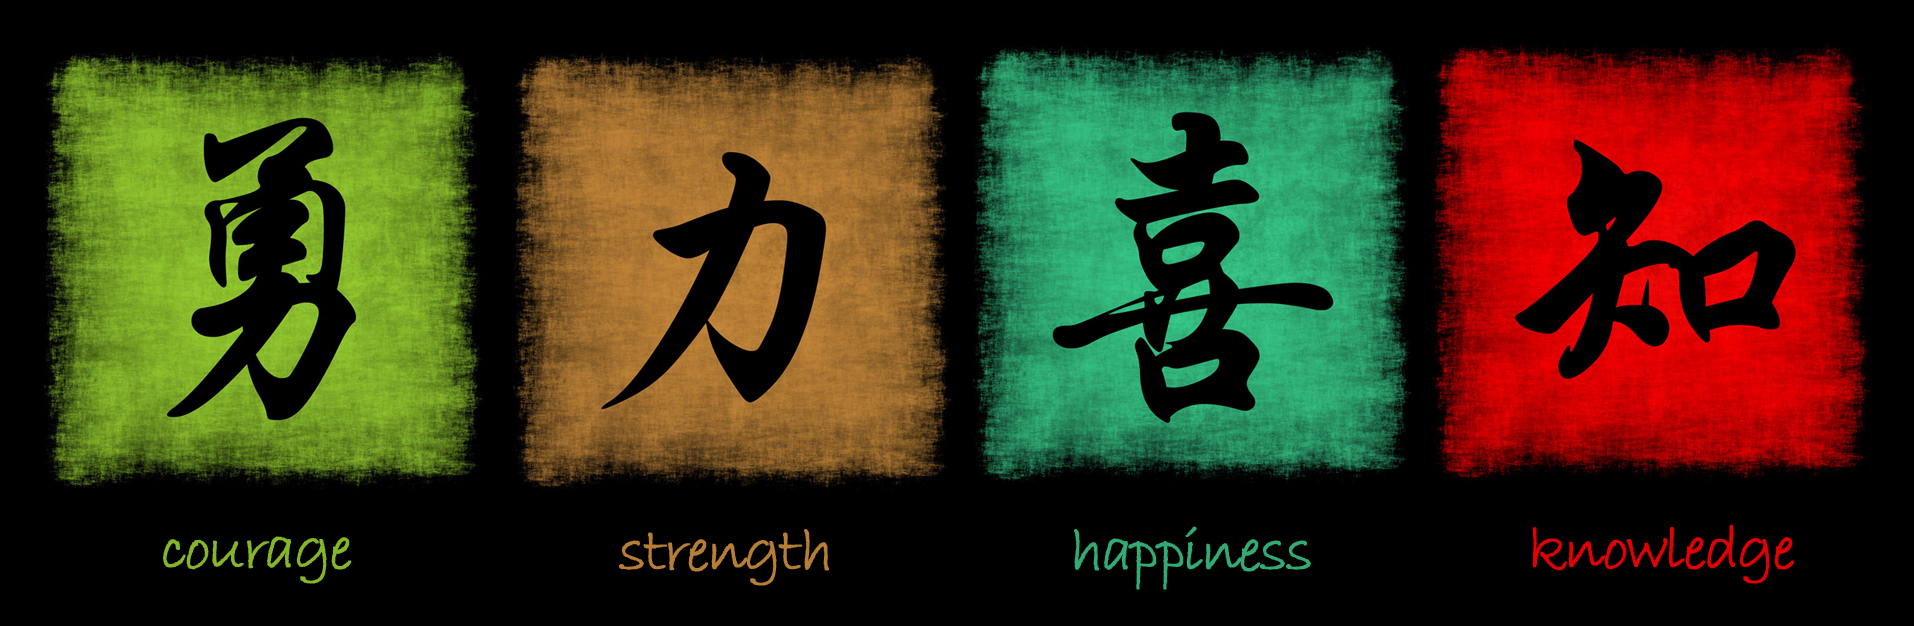 Courage Strength Happiness Knowledge